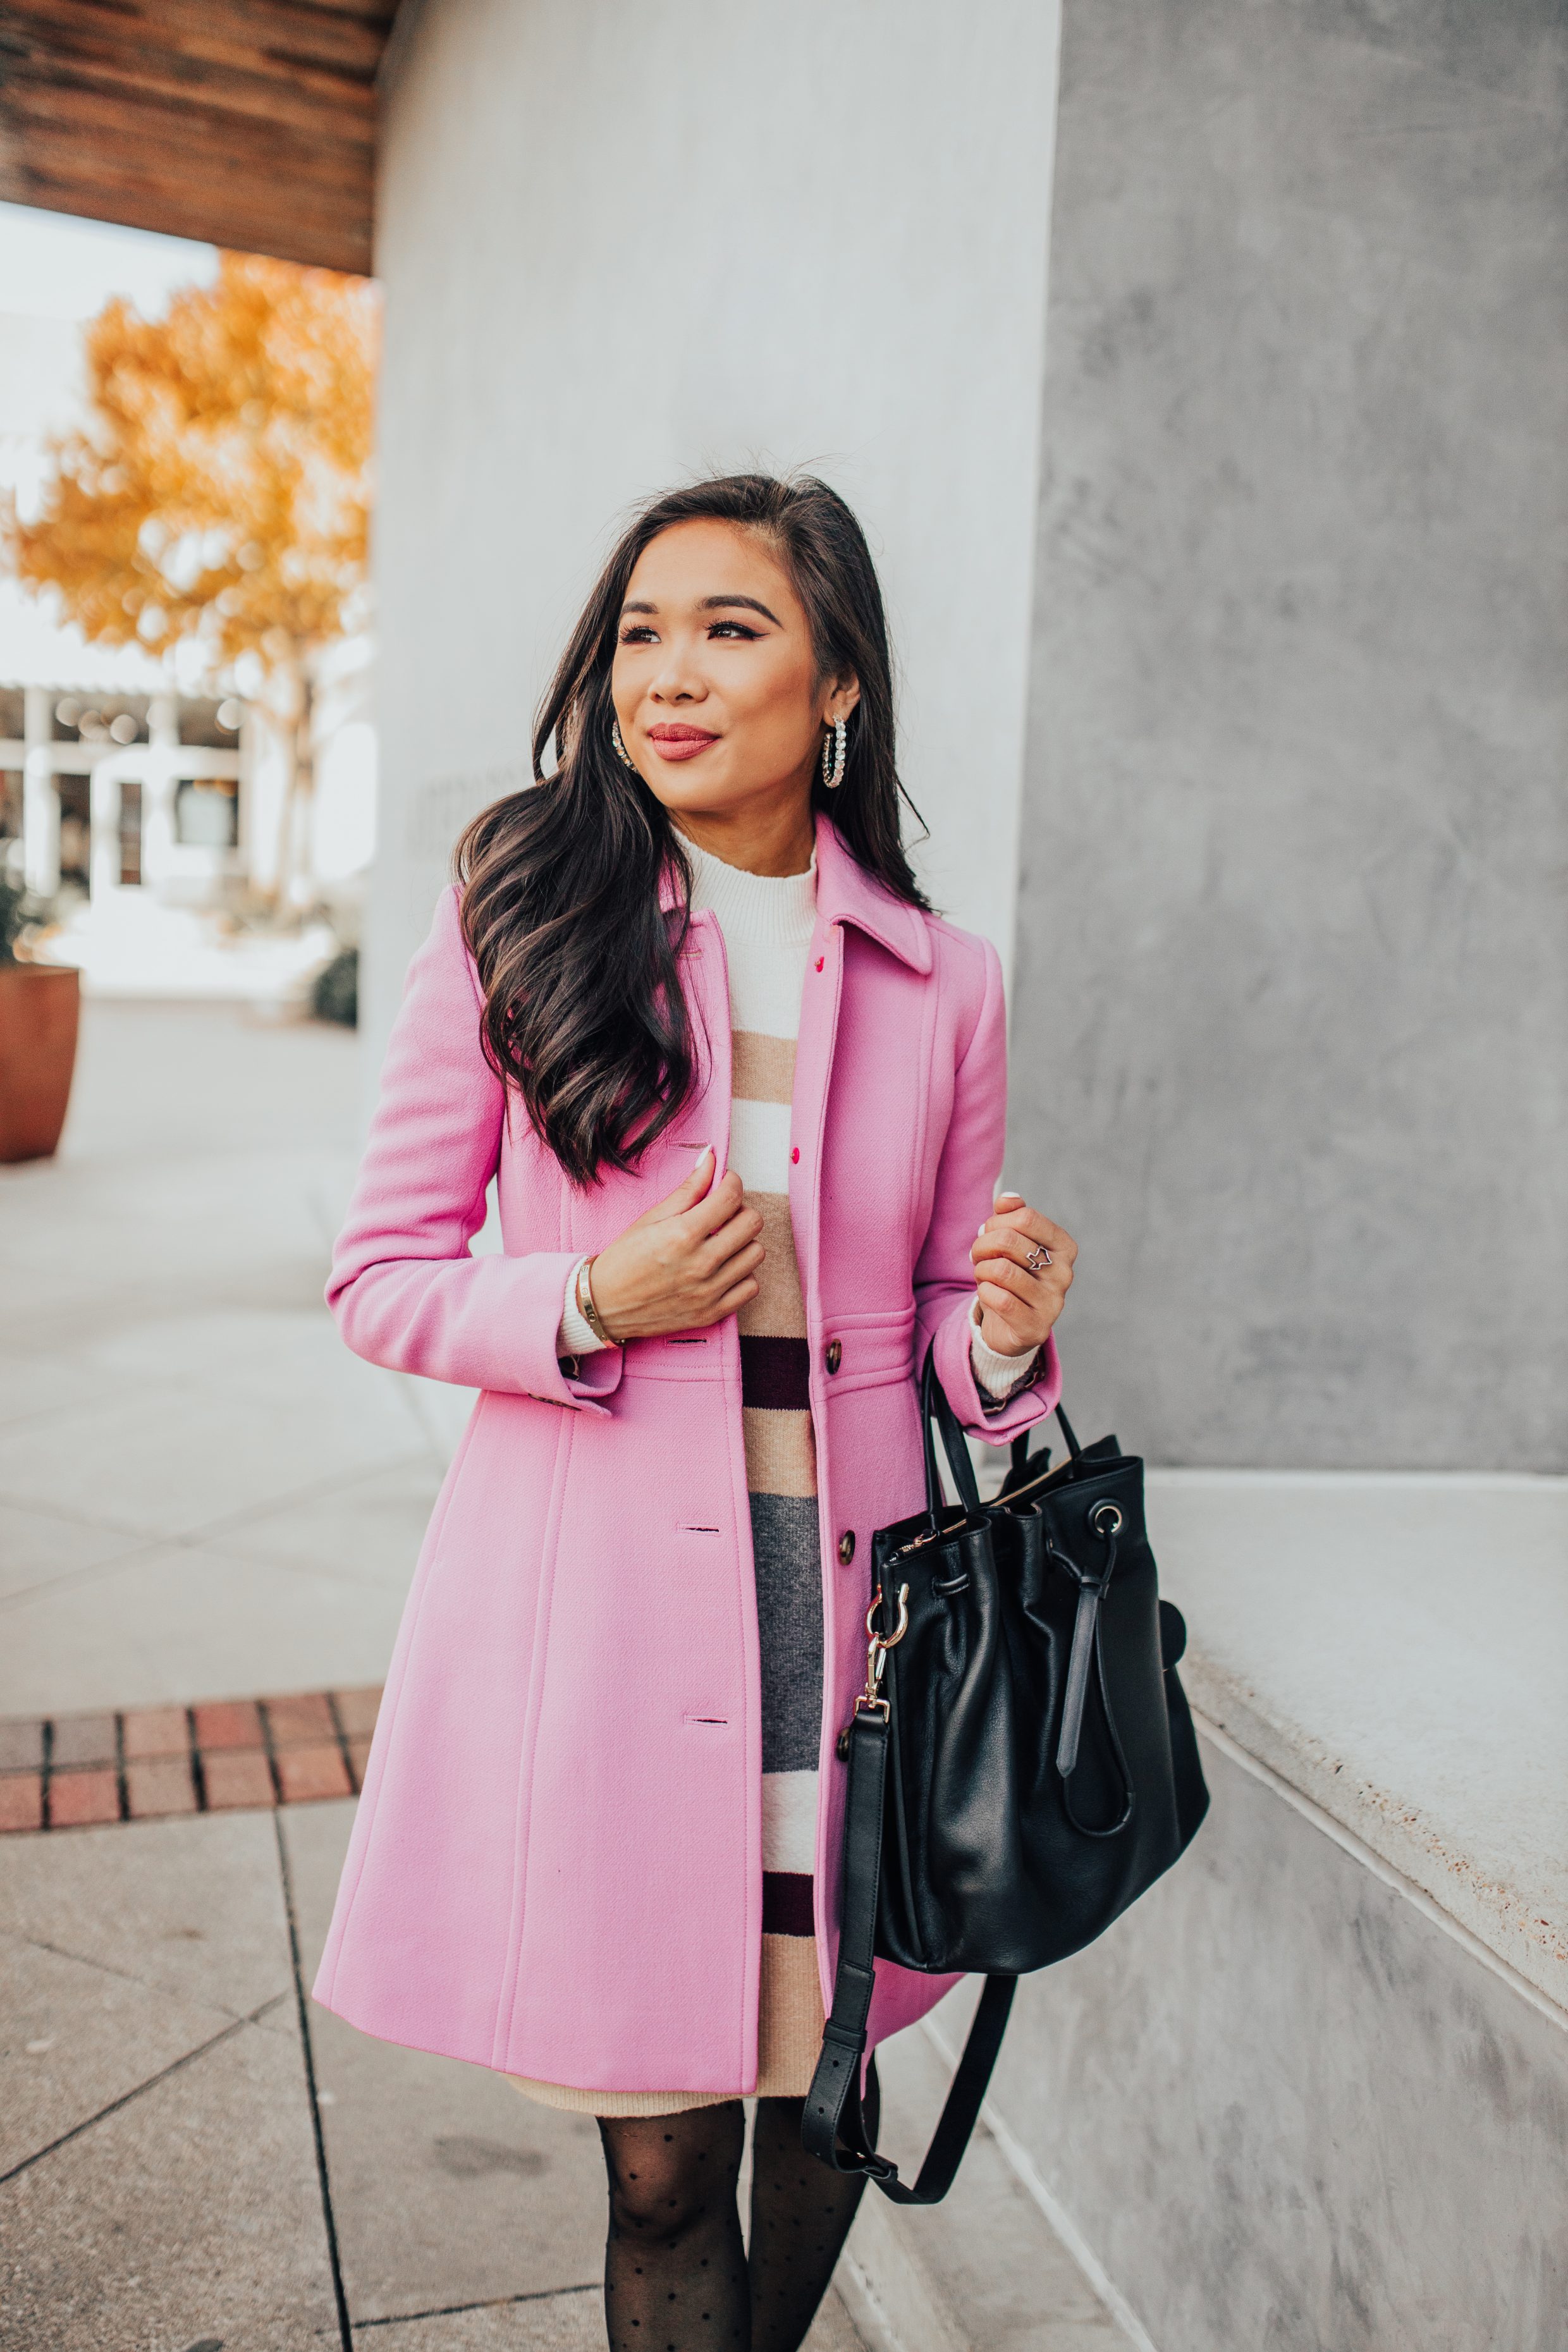 How to style a pink winter coat four different ways